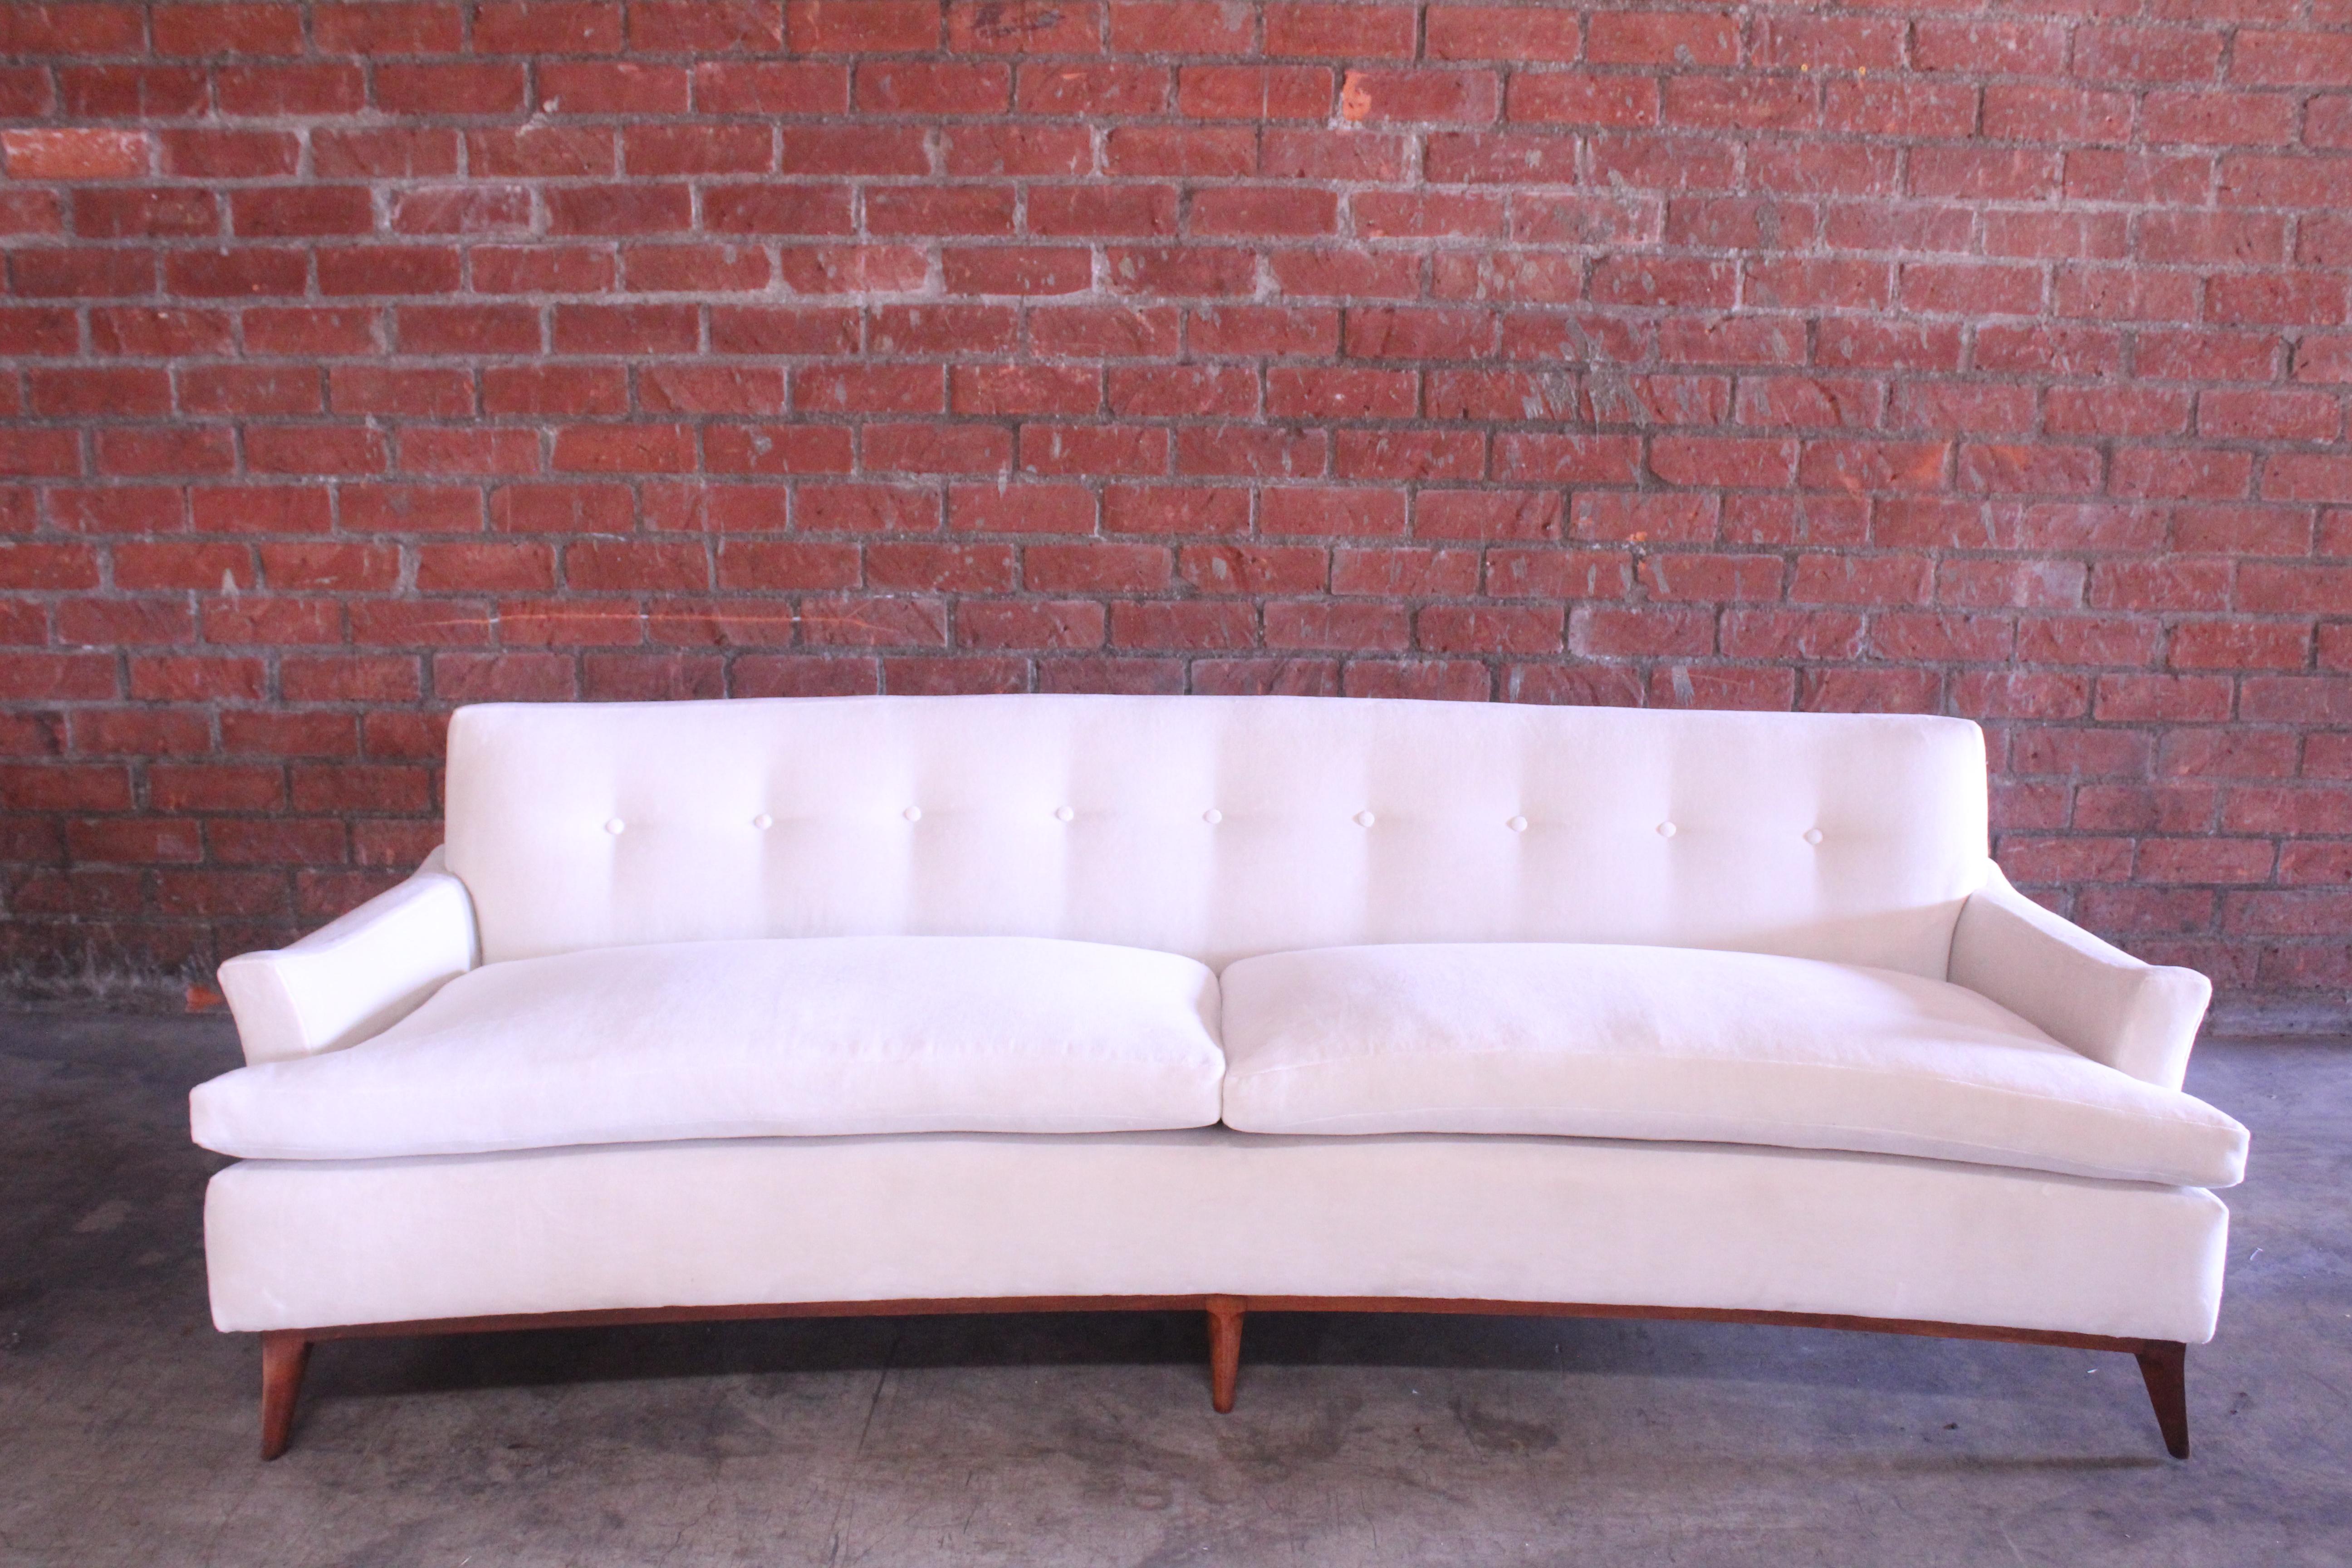 A vintage mid-century sofa from the 1950s attributed to Vladimir Kagan. This sofa has been recently upholstered in an off-white Italian cotton velvet. The sculpted walnut base has been refinished as well. In overall excellent condition.